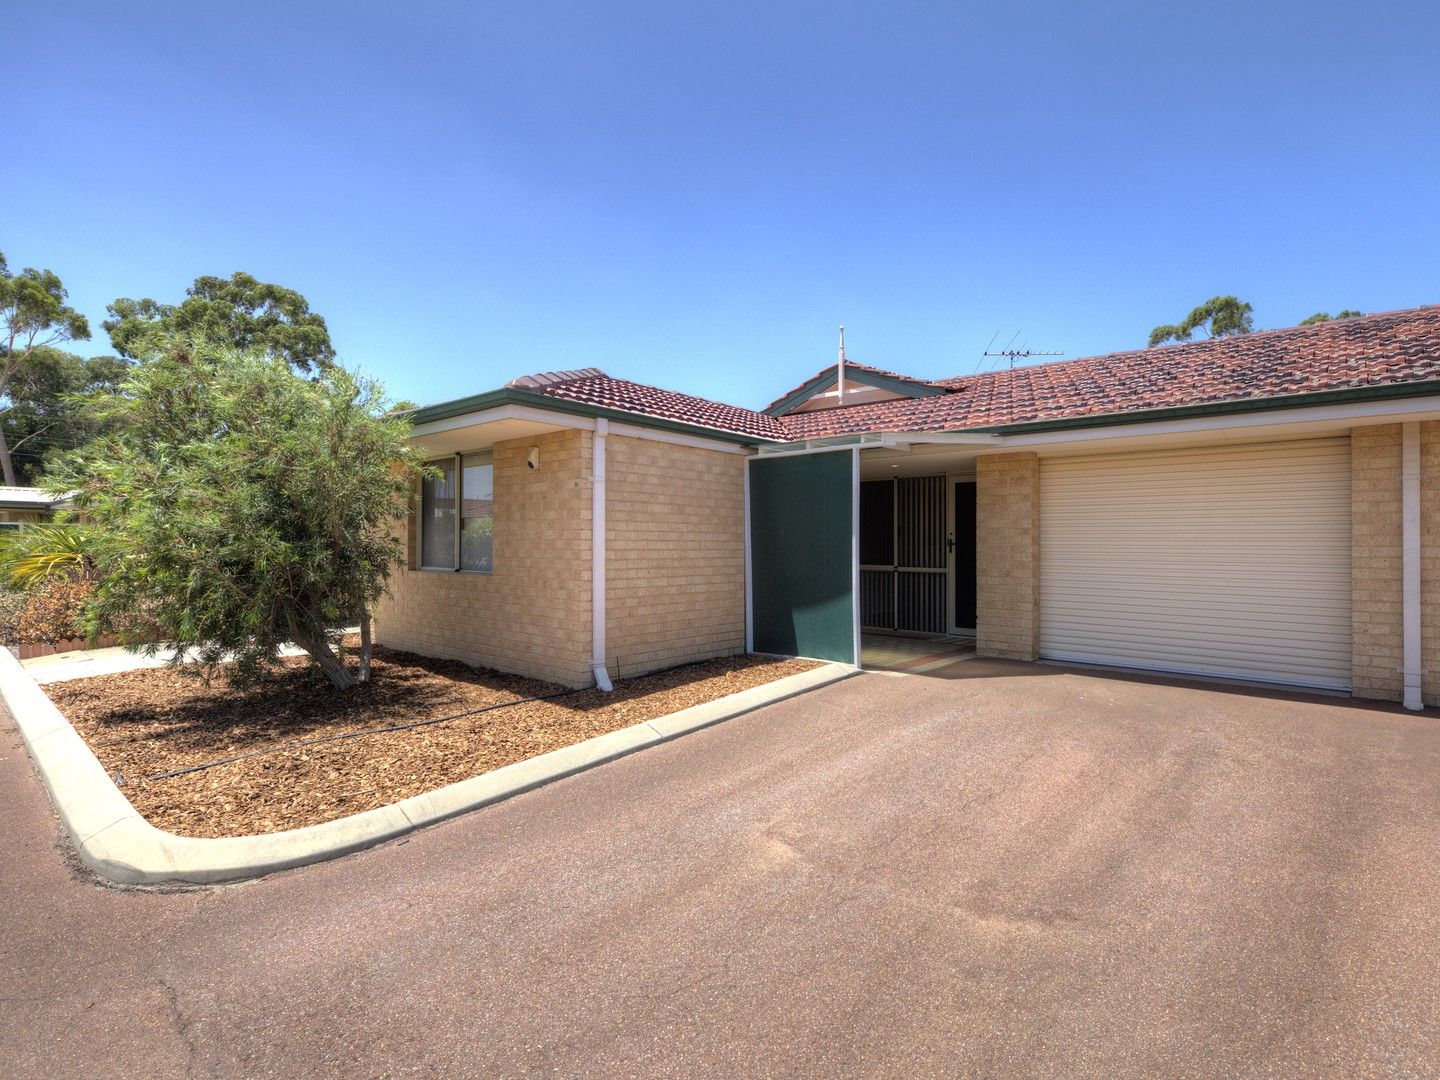 3 bedrooms Apartment / Unit / Flat in 11/15 Spring Avenue MIDLAND WA, 6056